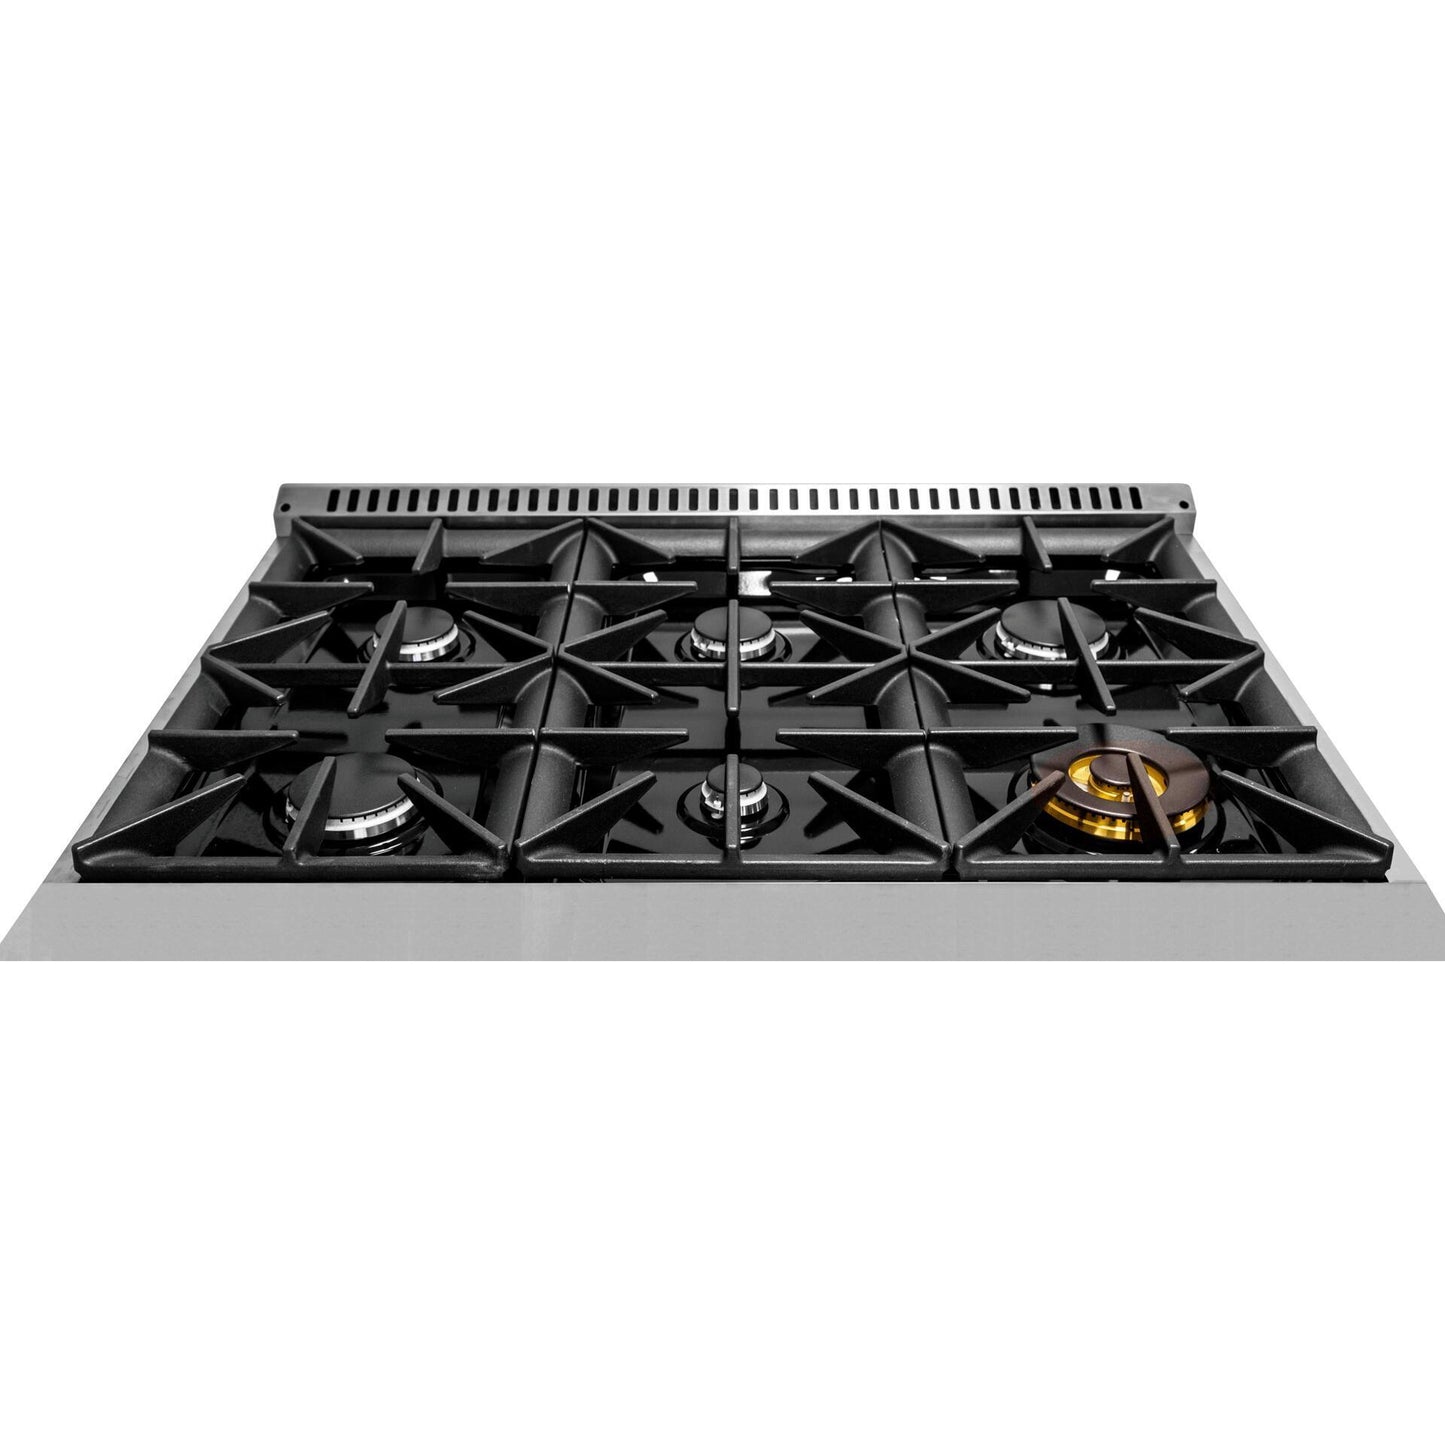 Forte FGR366BBB 36" 4.5 Cu. Ft. Single Oven Black Freestanding Natural Gas LP Convertible Residential Gas Range With Convertion Kit, Grate, Racks, Trays, and Back Splash